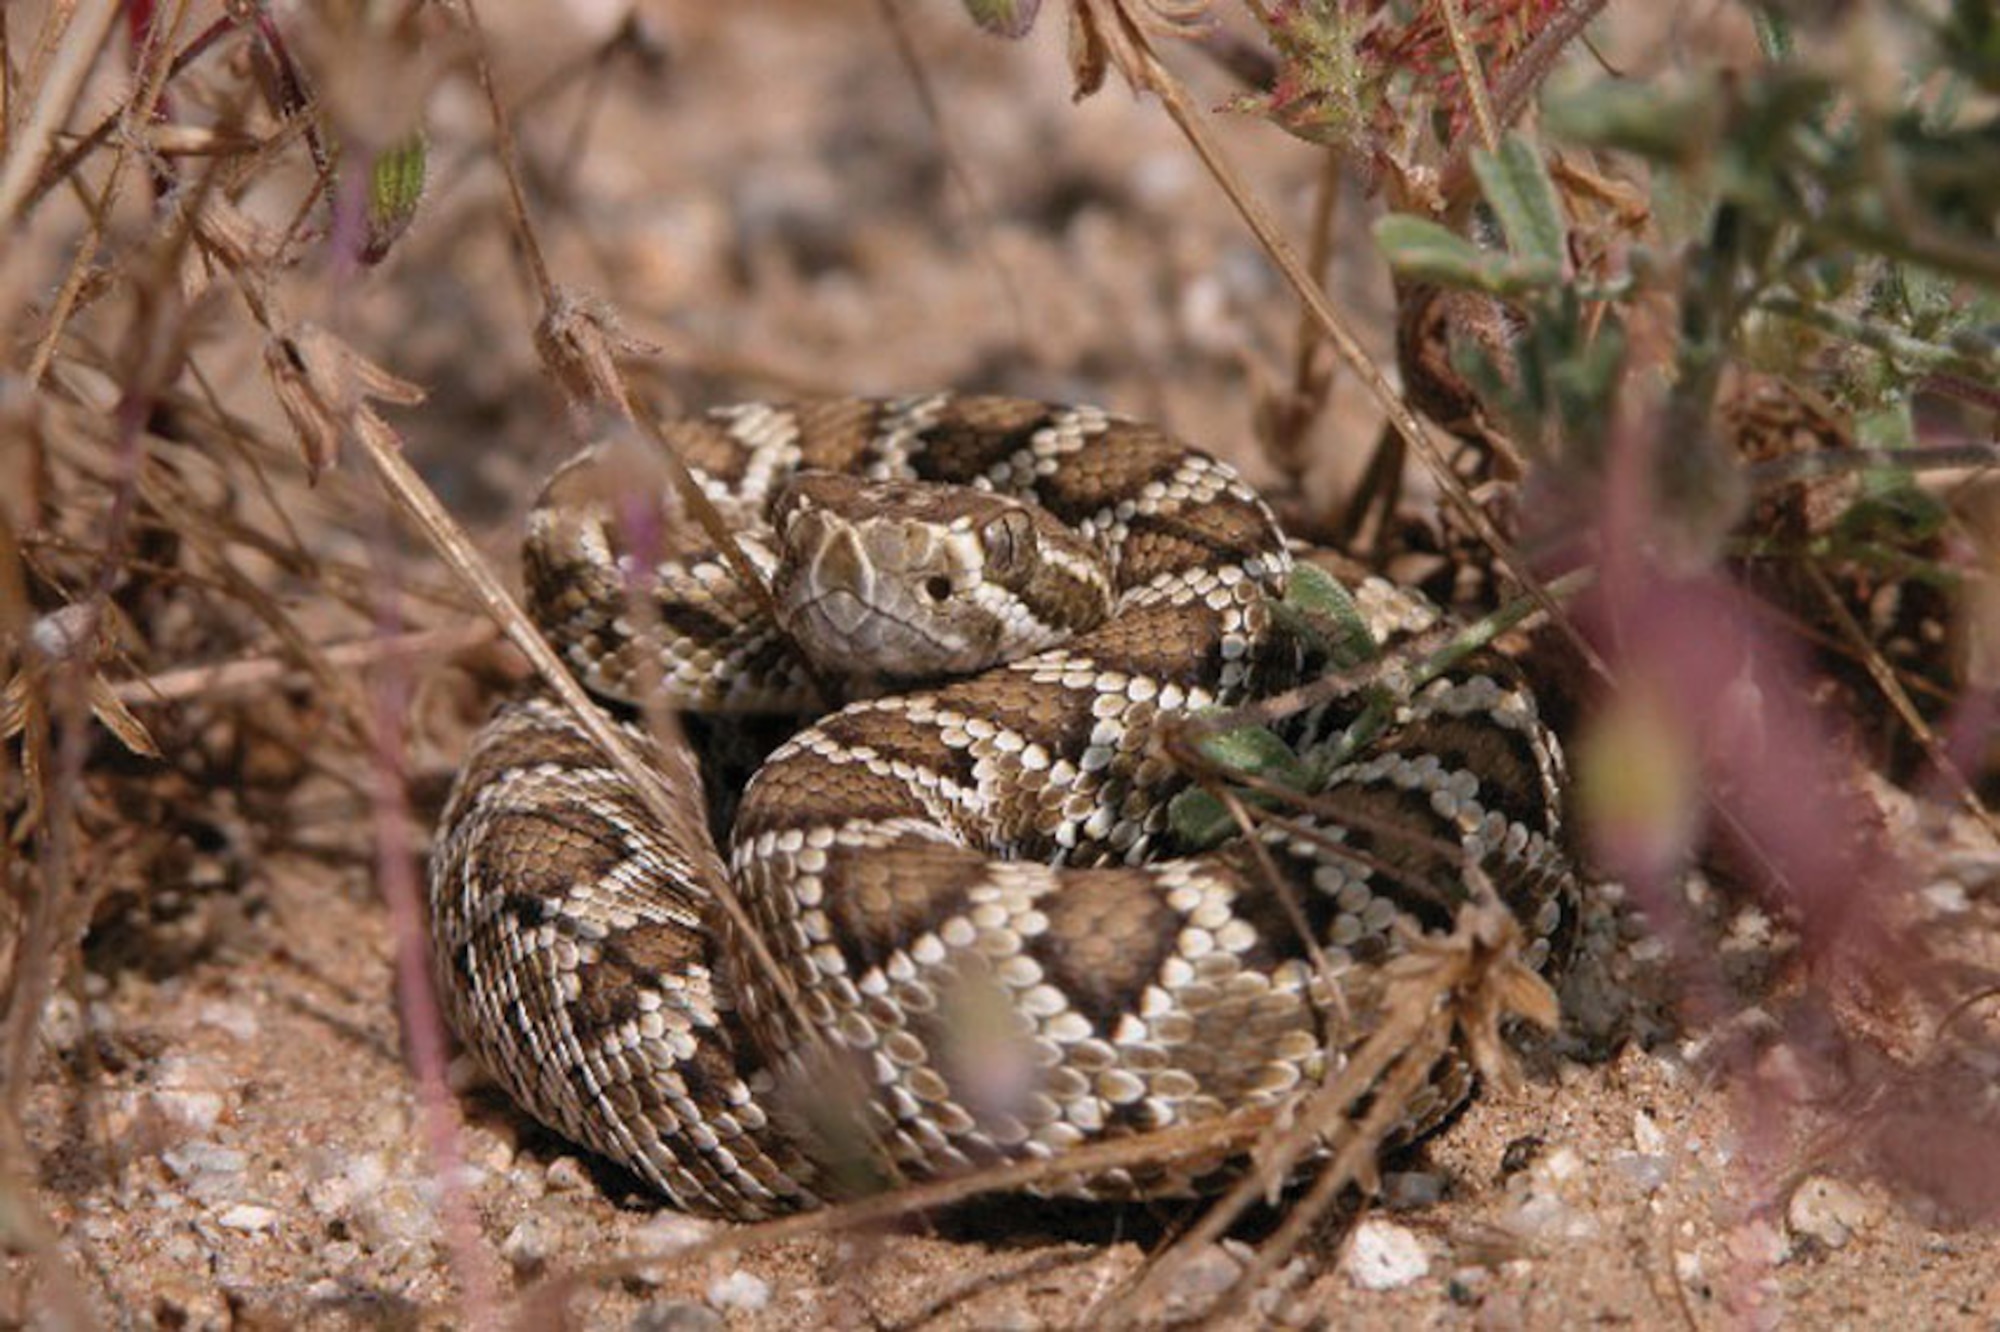 The poisonous Mojave green rattlesnake is one of the many reptiles common to the Mojave Desert area. Other snakes seen here are the sidewinder rattlesnake, the California king snake and the gopher snake. (Photo by Mark Bratton)